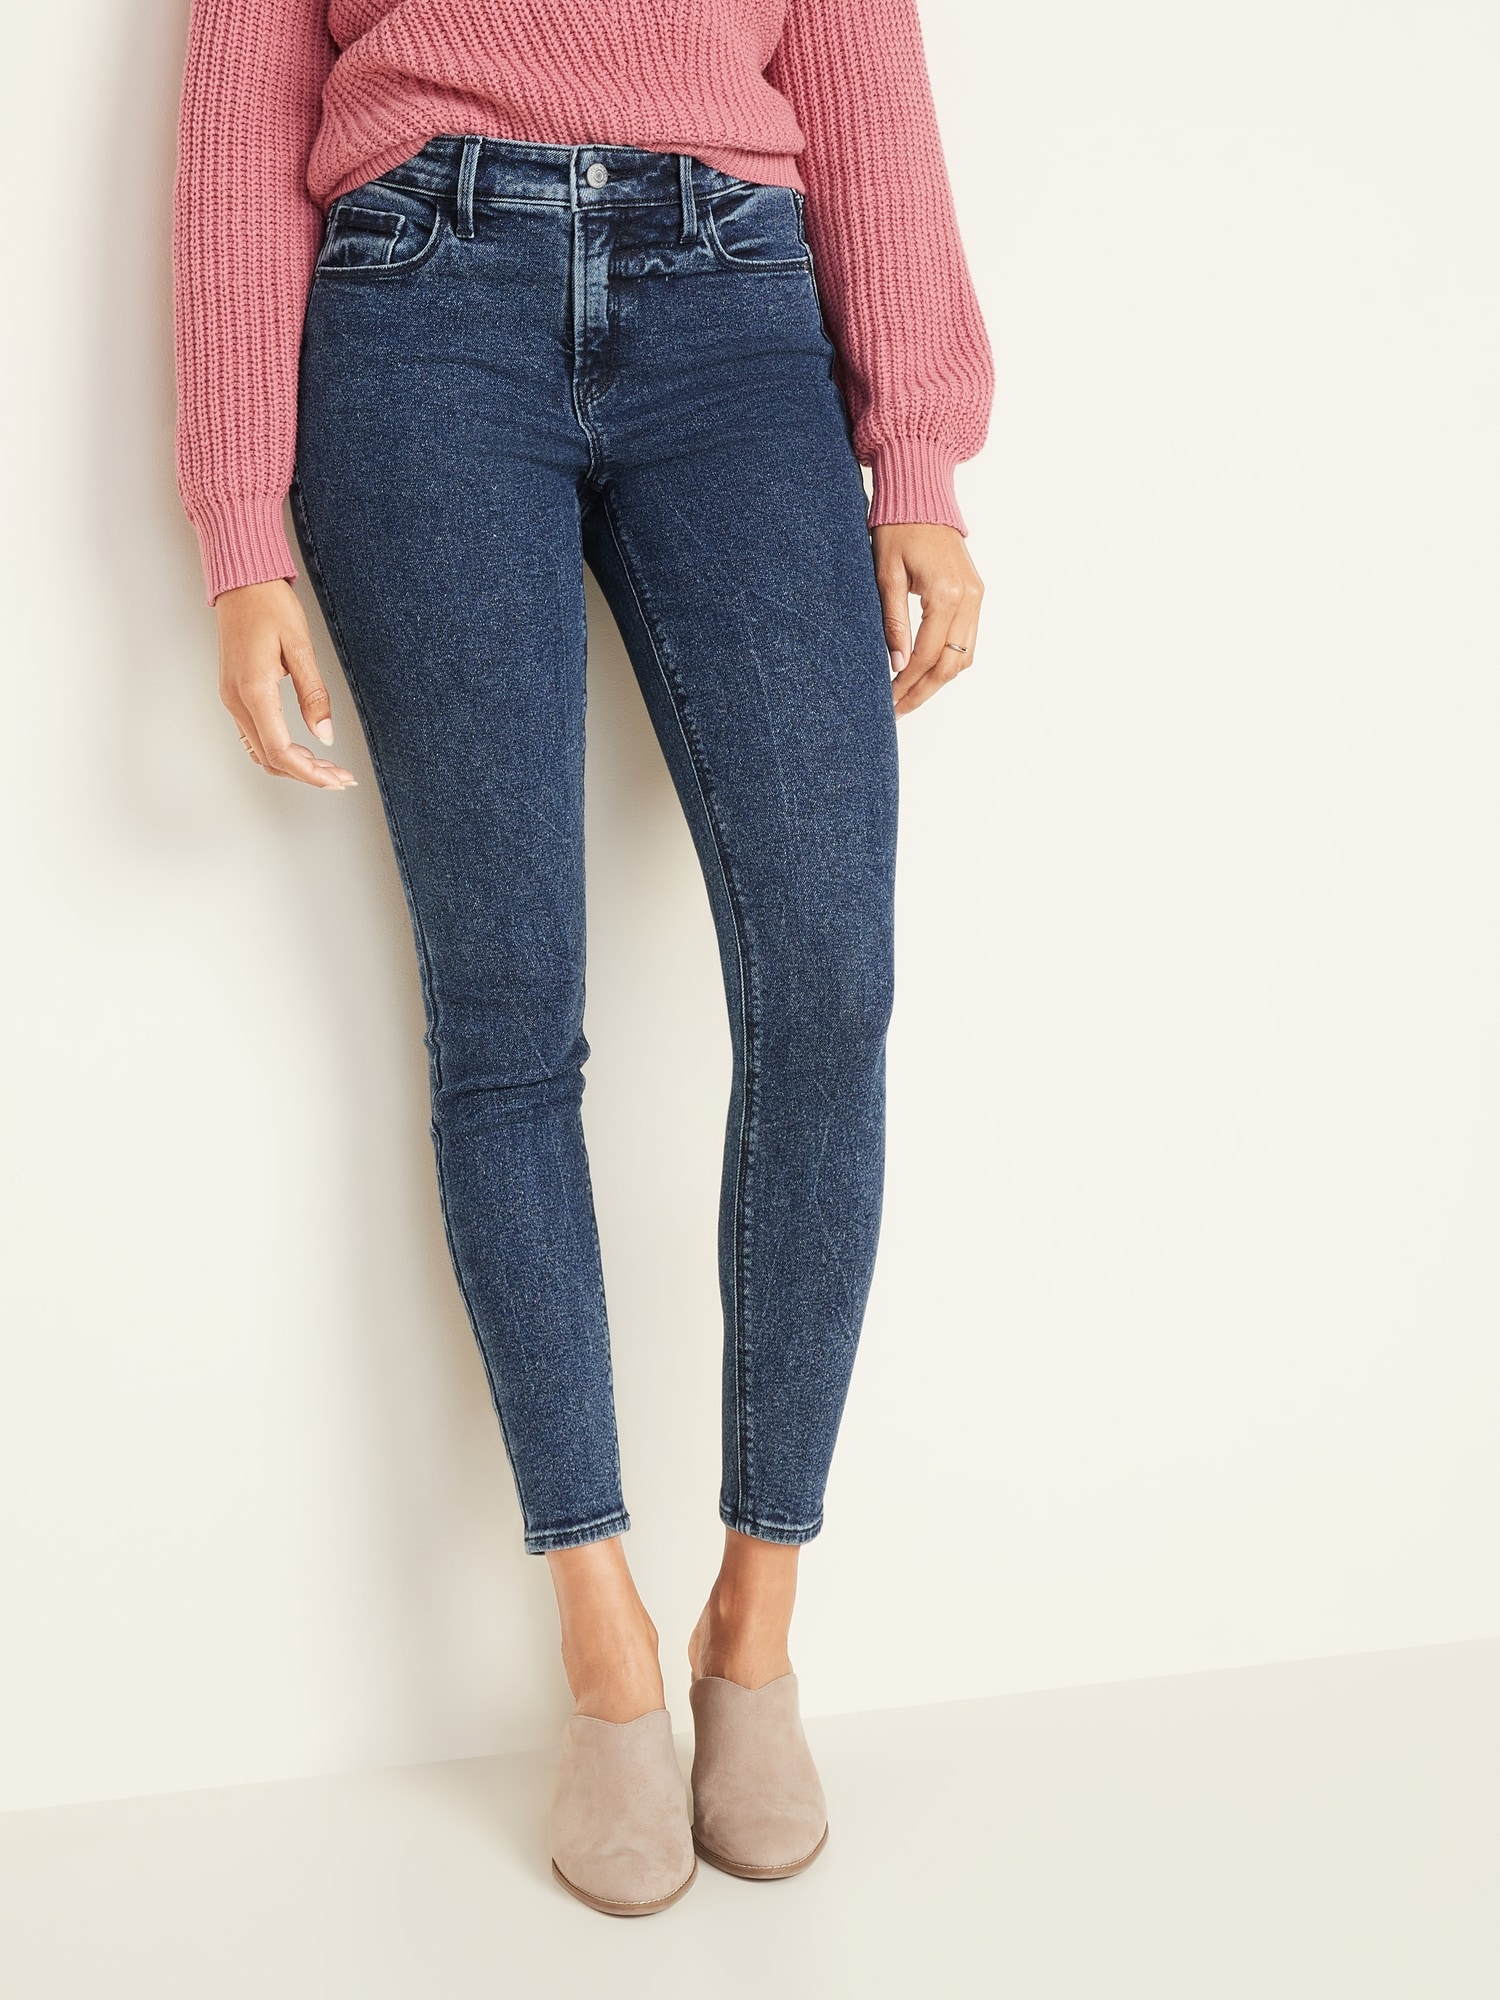 high rise jeans old navy